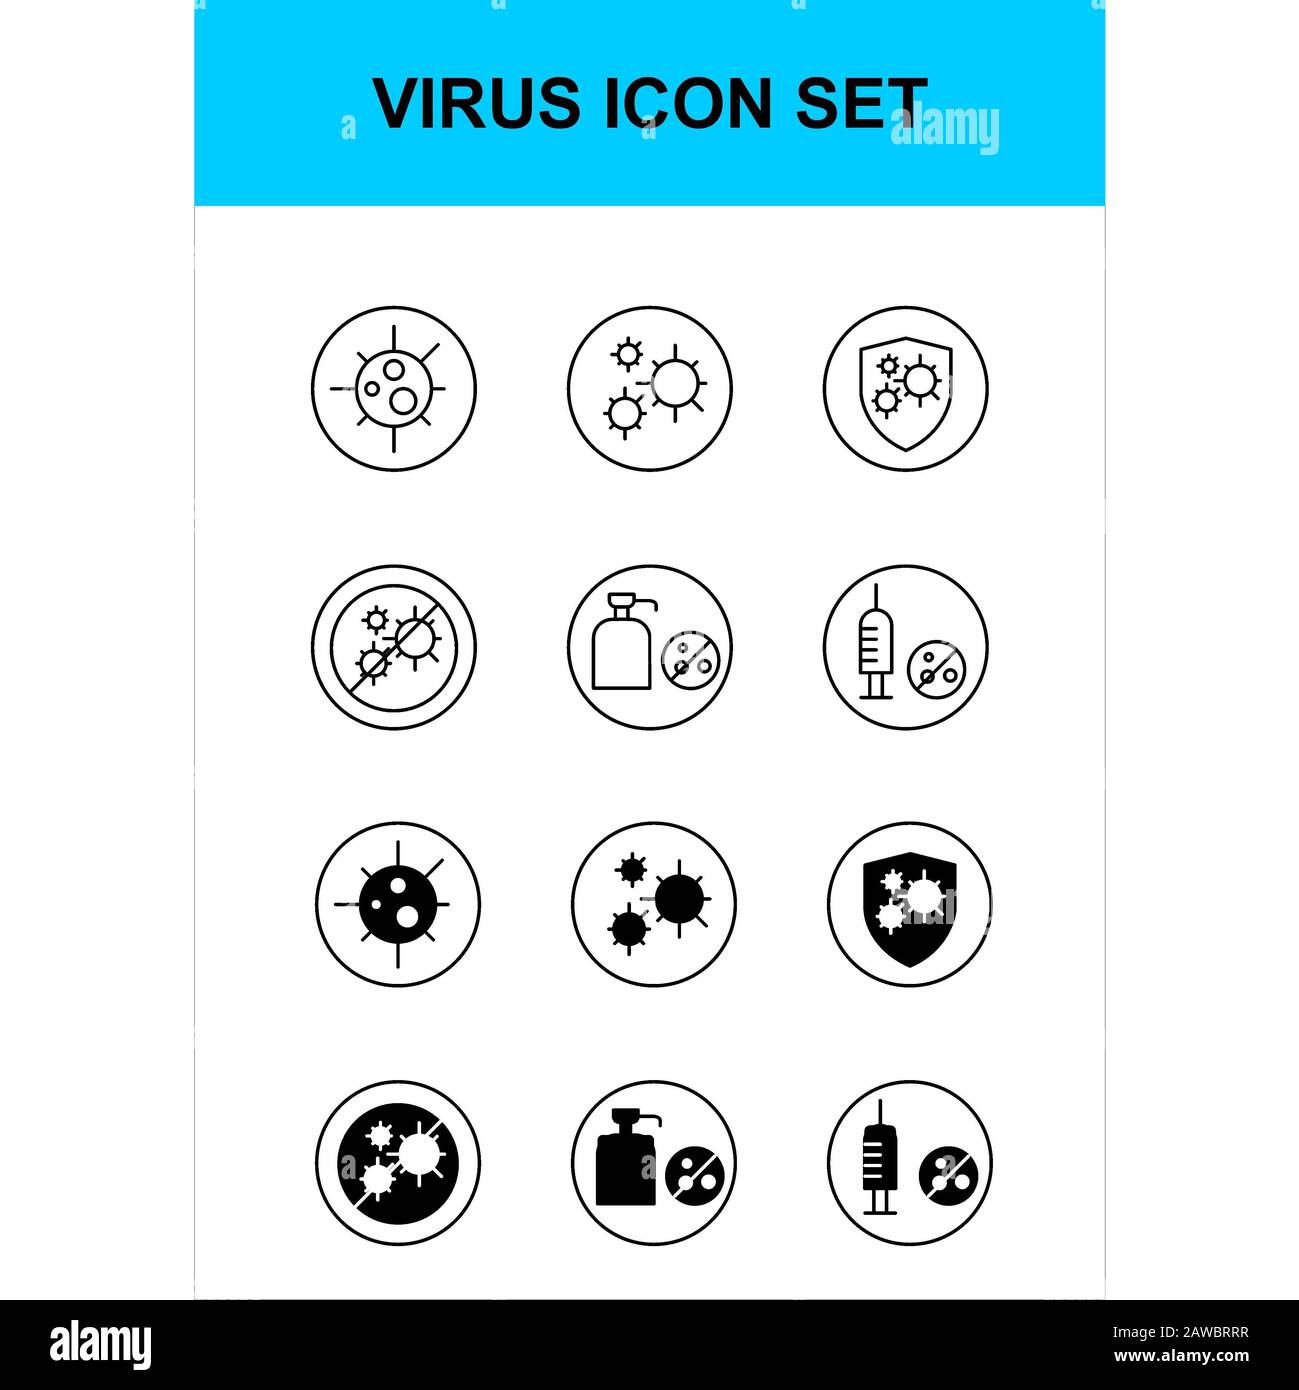 virus icon set. Corona. glyph and outline style.Flu, fever,cold, Virus, corona, lung, wash, hand, bottle, tablet, vaccine, bed, rest, anti-virus. Stock Photo